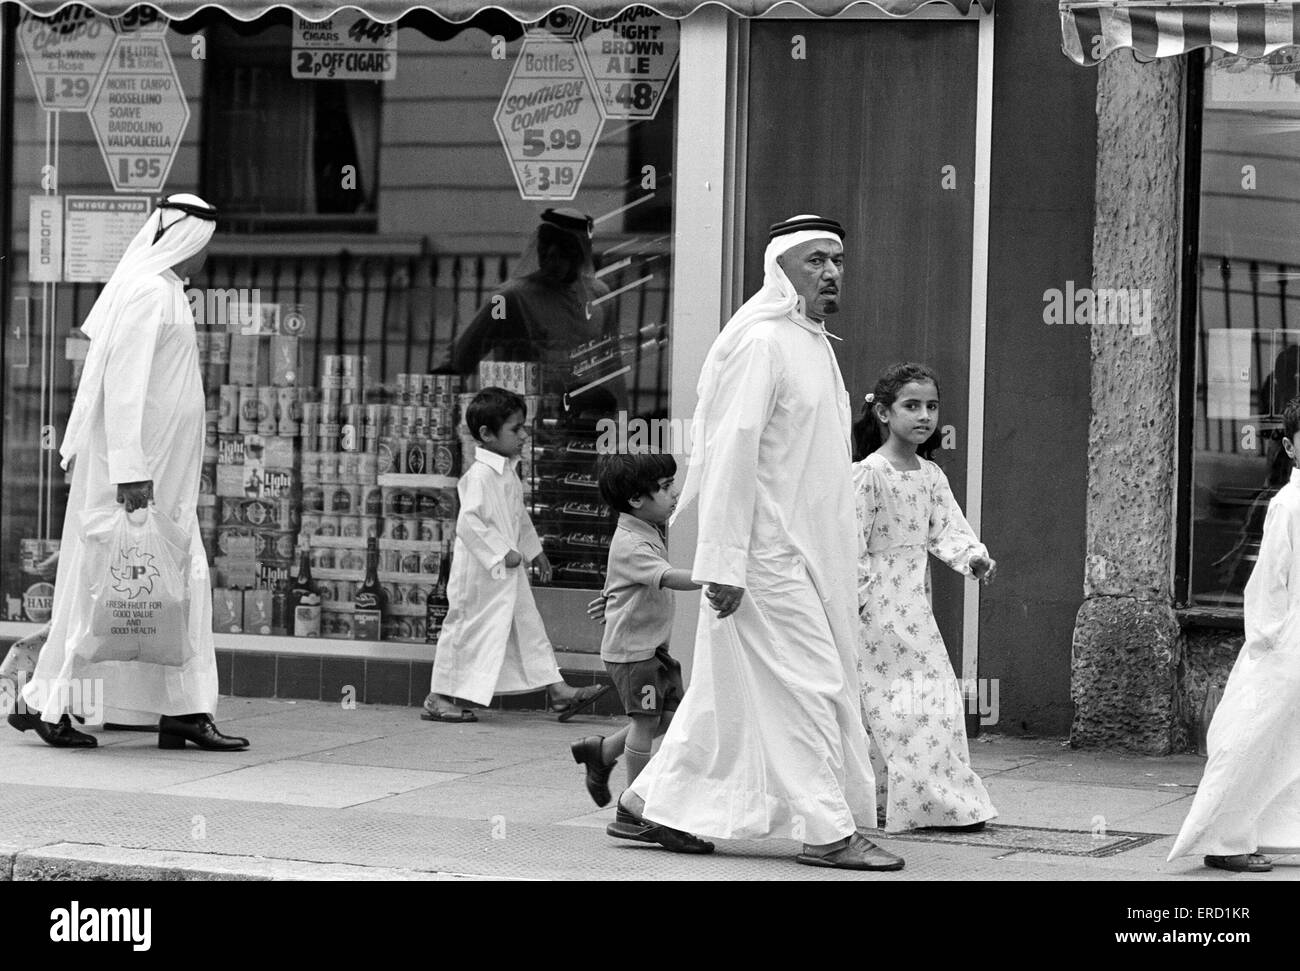 Arab Community High Resolution Stock Photography and Images - Alamy